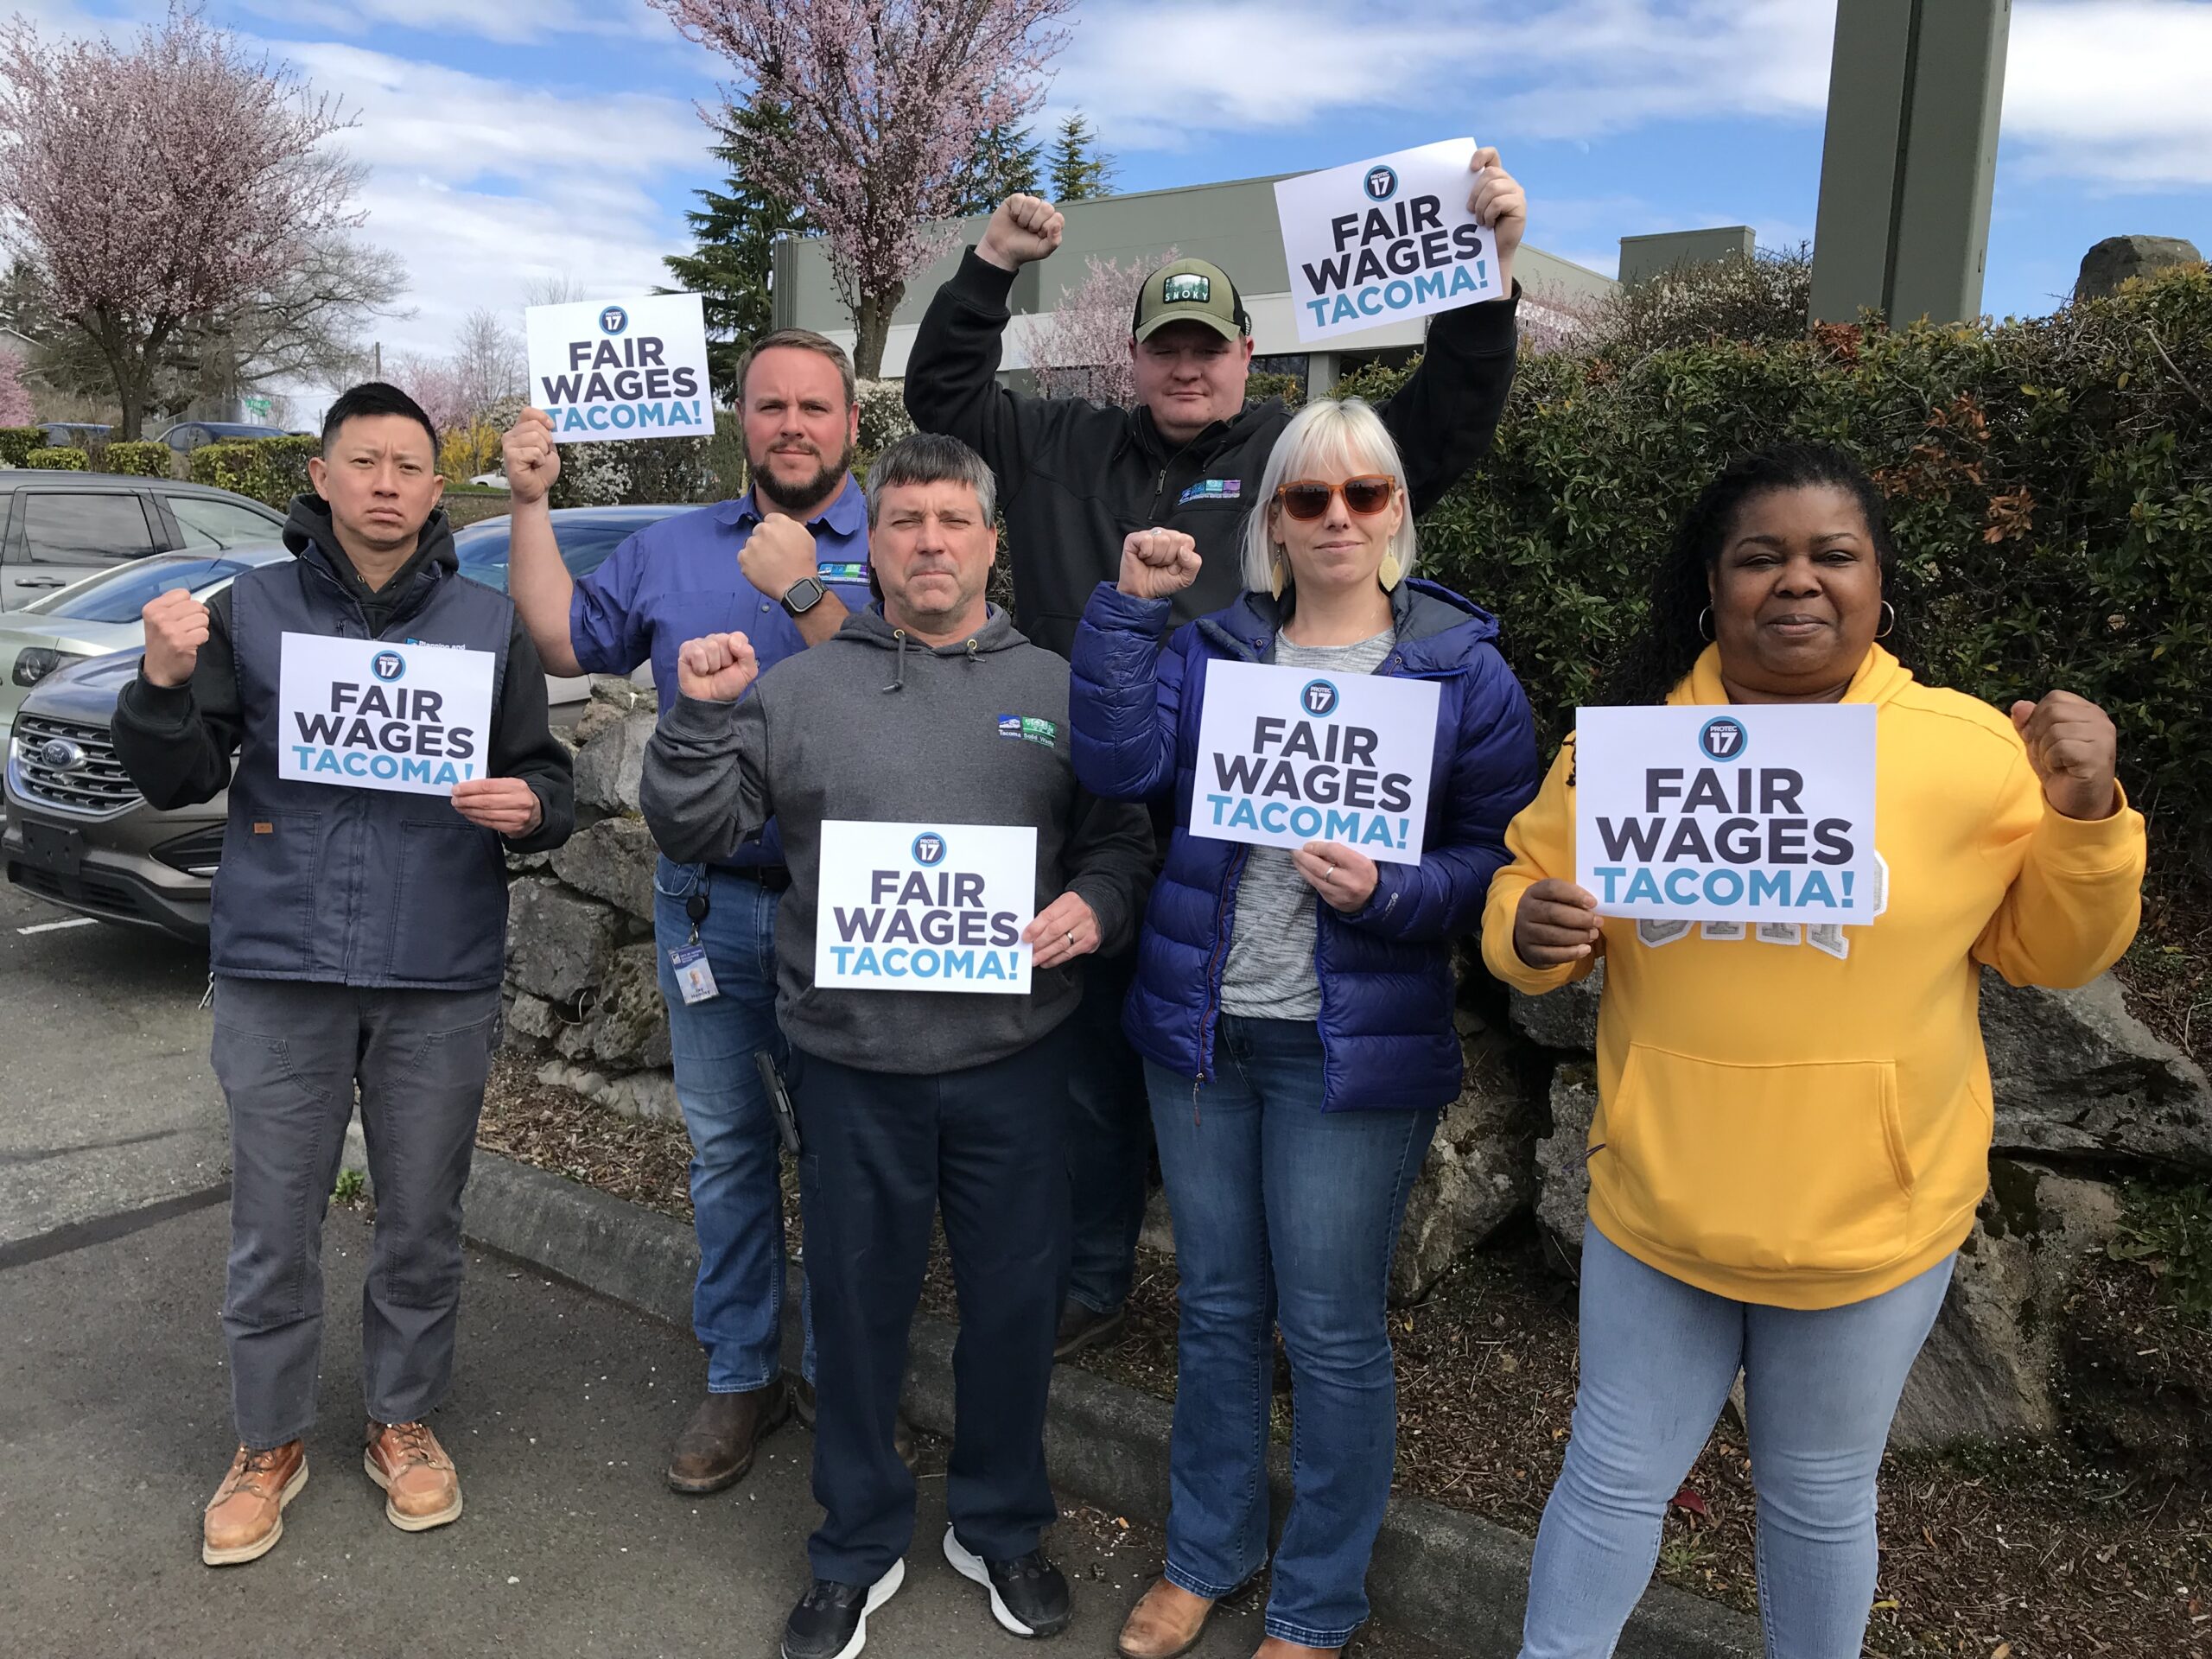 Picture of the City of Tacoma bargaining team posing with their fists raised in solidarity and holding signs that read, "FAIR WAGES TACOMA!"